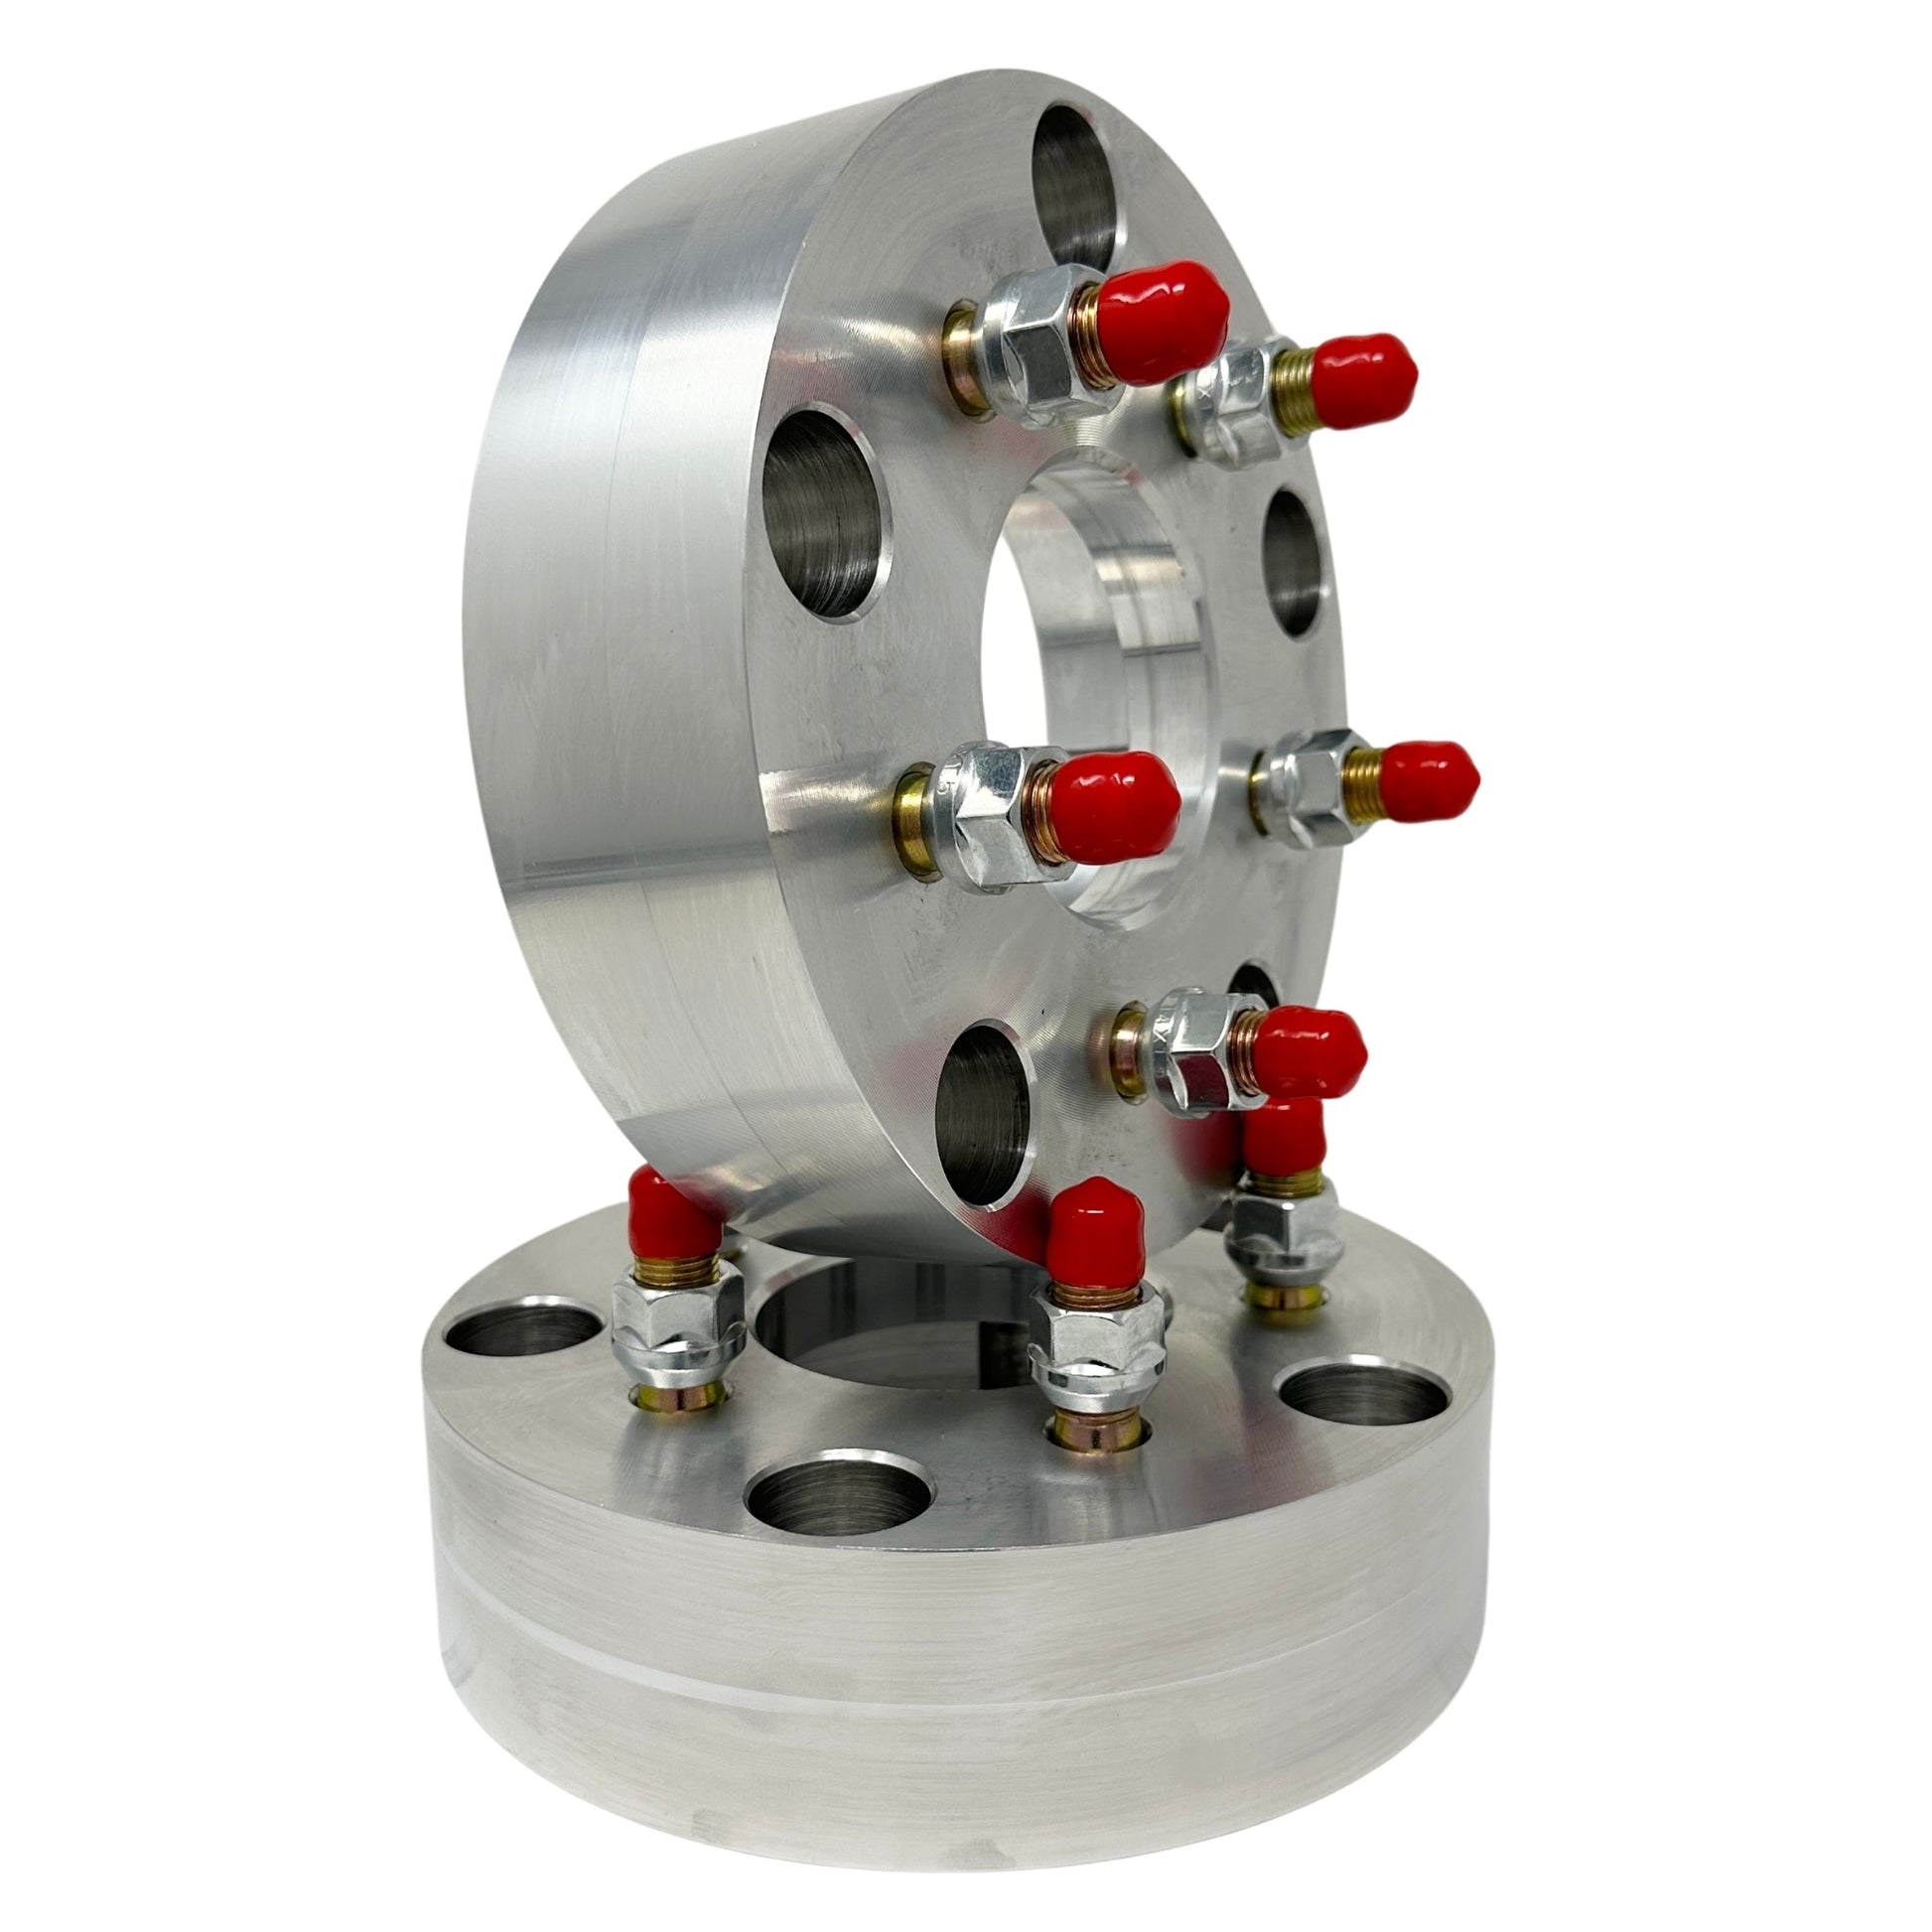 5x205 to 5x112 Wheel Spacer/Adapter - Thickness: 1.25- 4.0